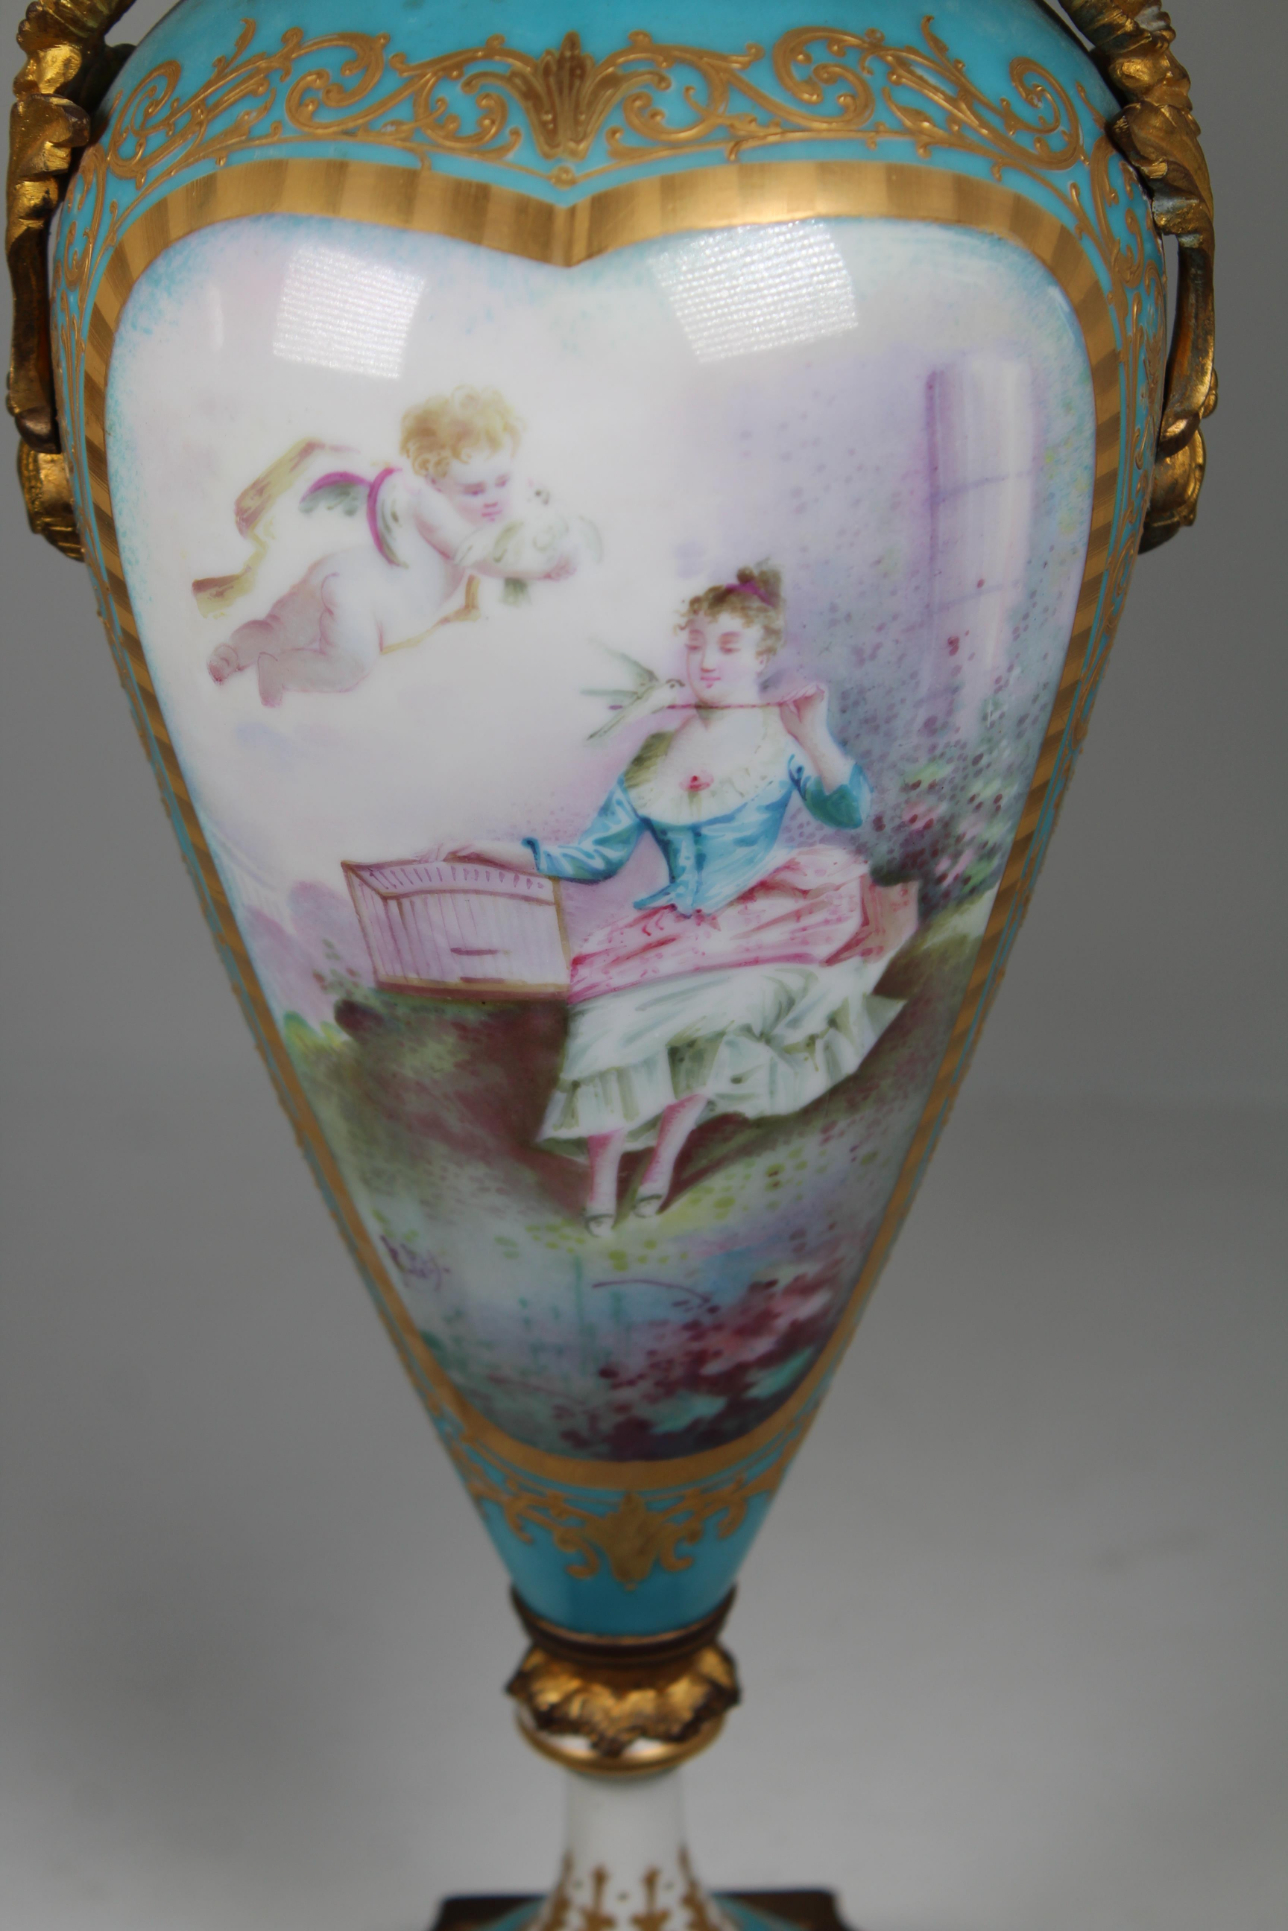 (2) Antique French Porcelain Twin Handled Urns - Image 5 of 9